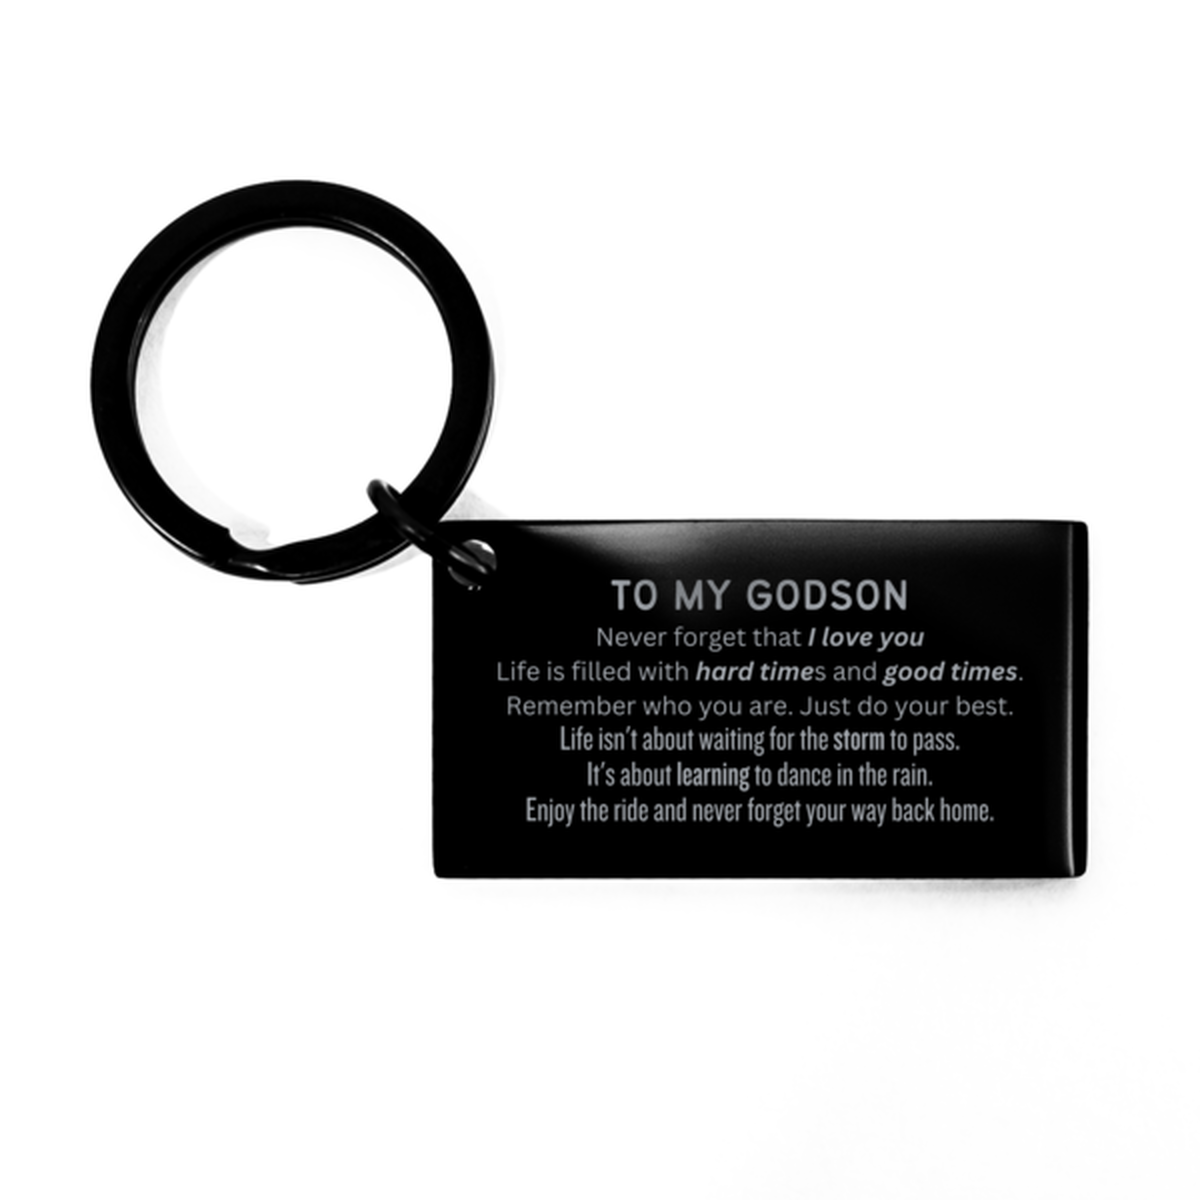 Christmas Godson Keychain Gifts, To My Godson Birthday Thank You Gifts For Godson, Graduation Unique Gifts For Godson To My Godson Never forget that I love you life is filled with hard times and good times. Remember who you are. Just do your best